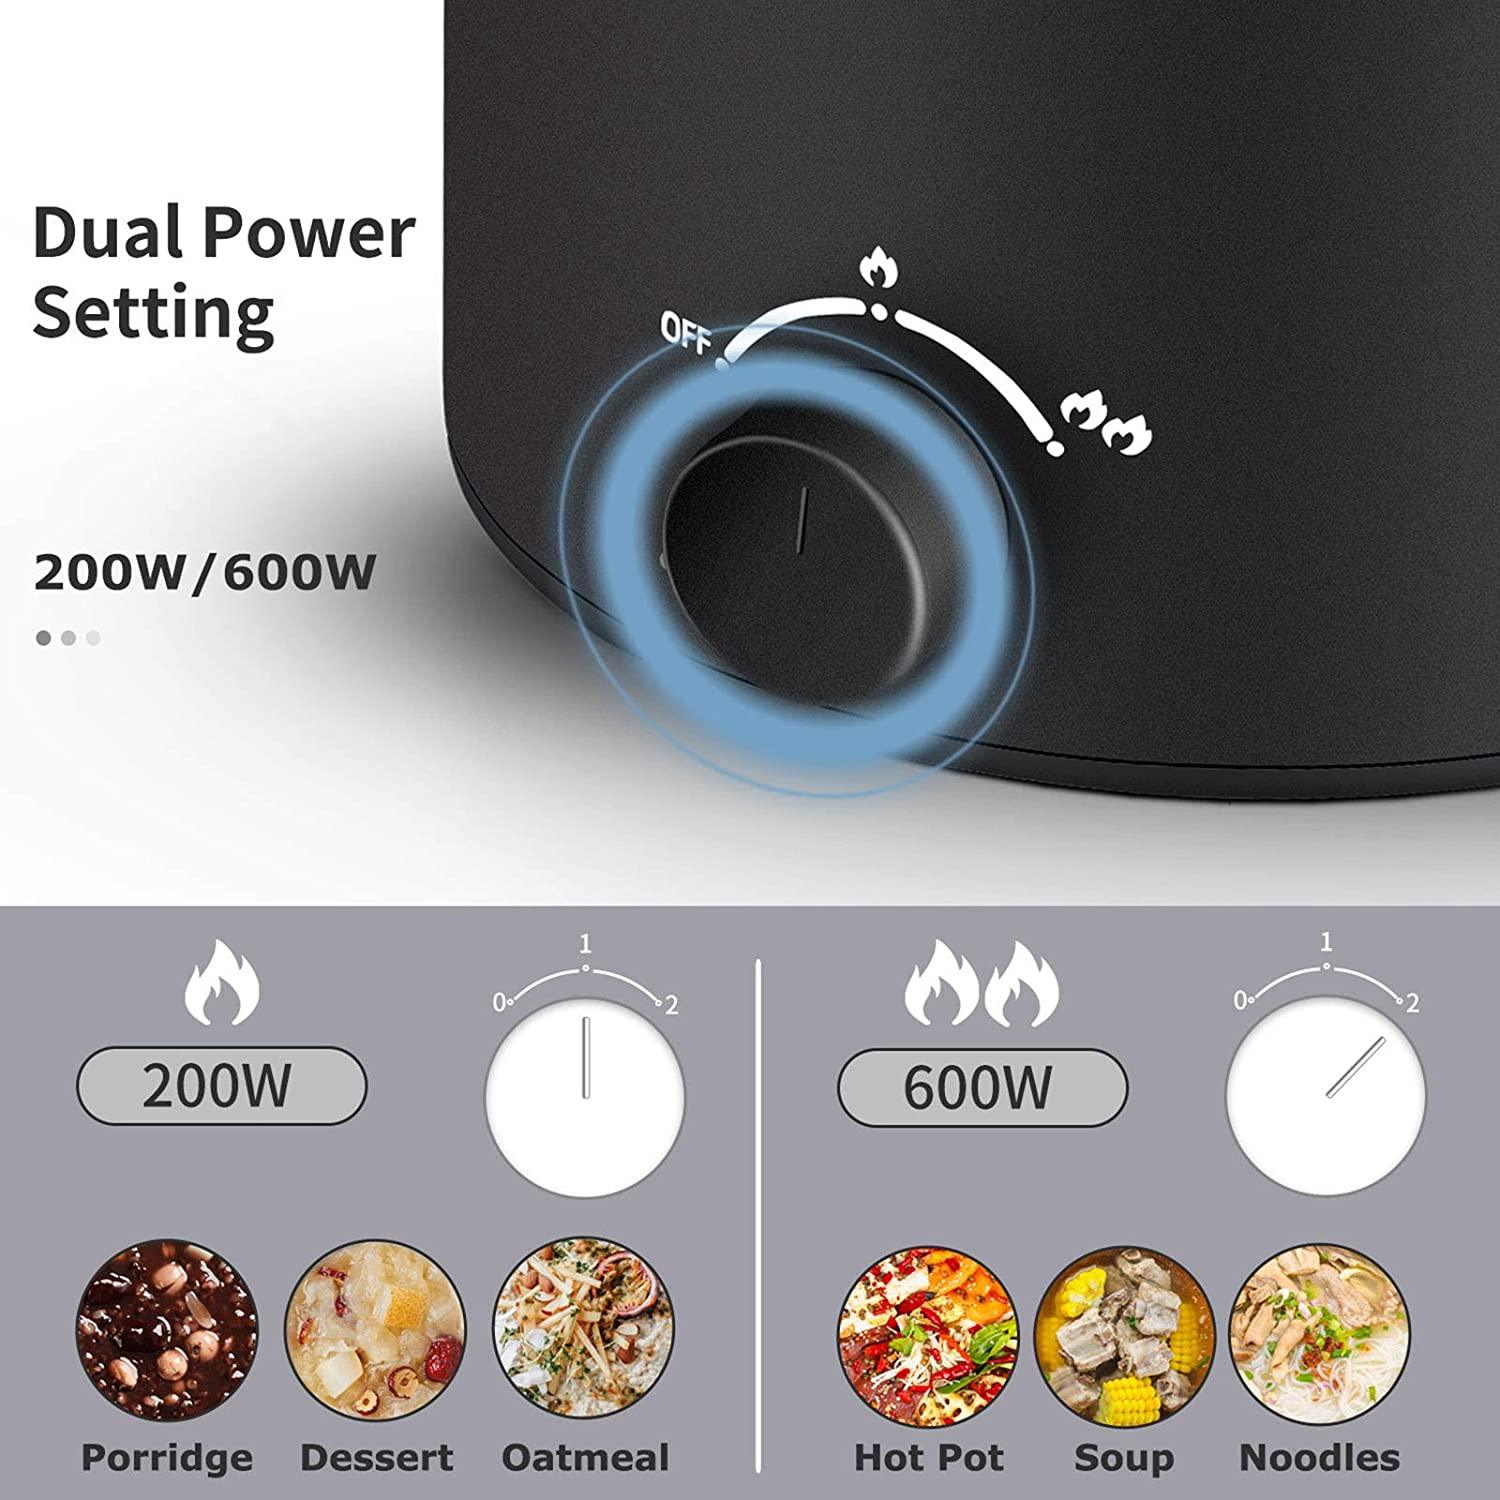  Topwit Electric Cooker with Steamer, 1.6L Ramen Cooker